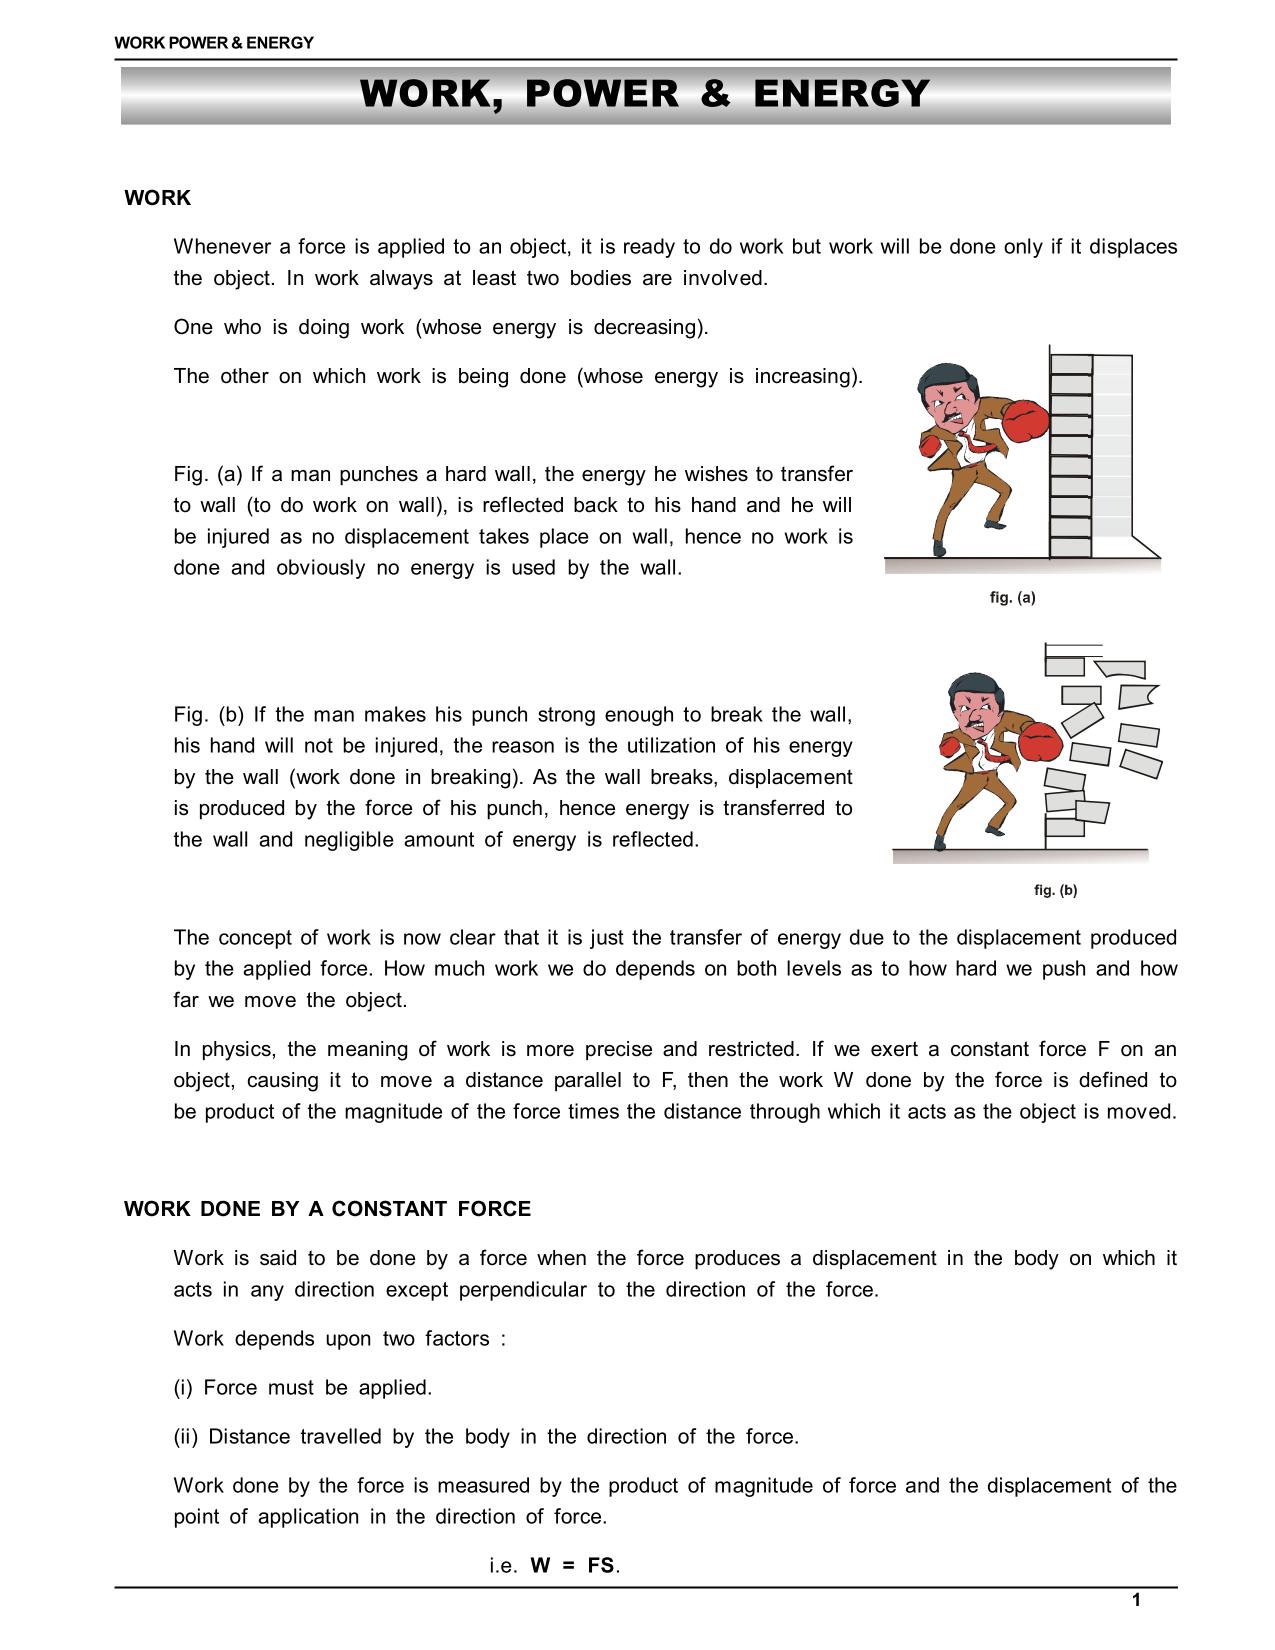 work energy and power class 11 notes